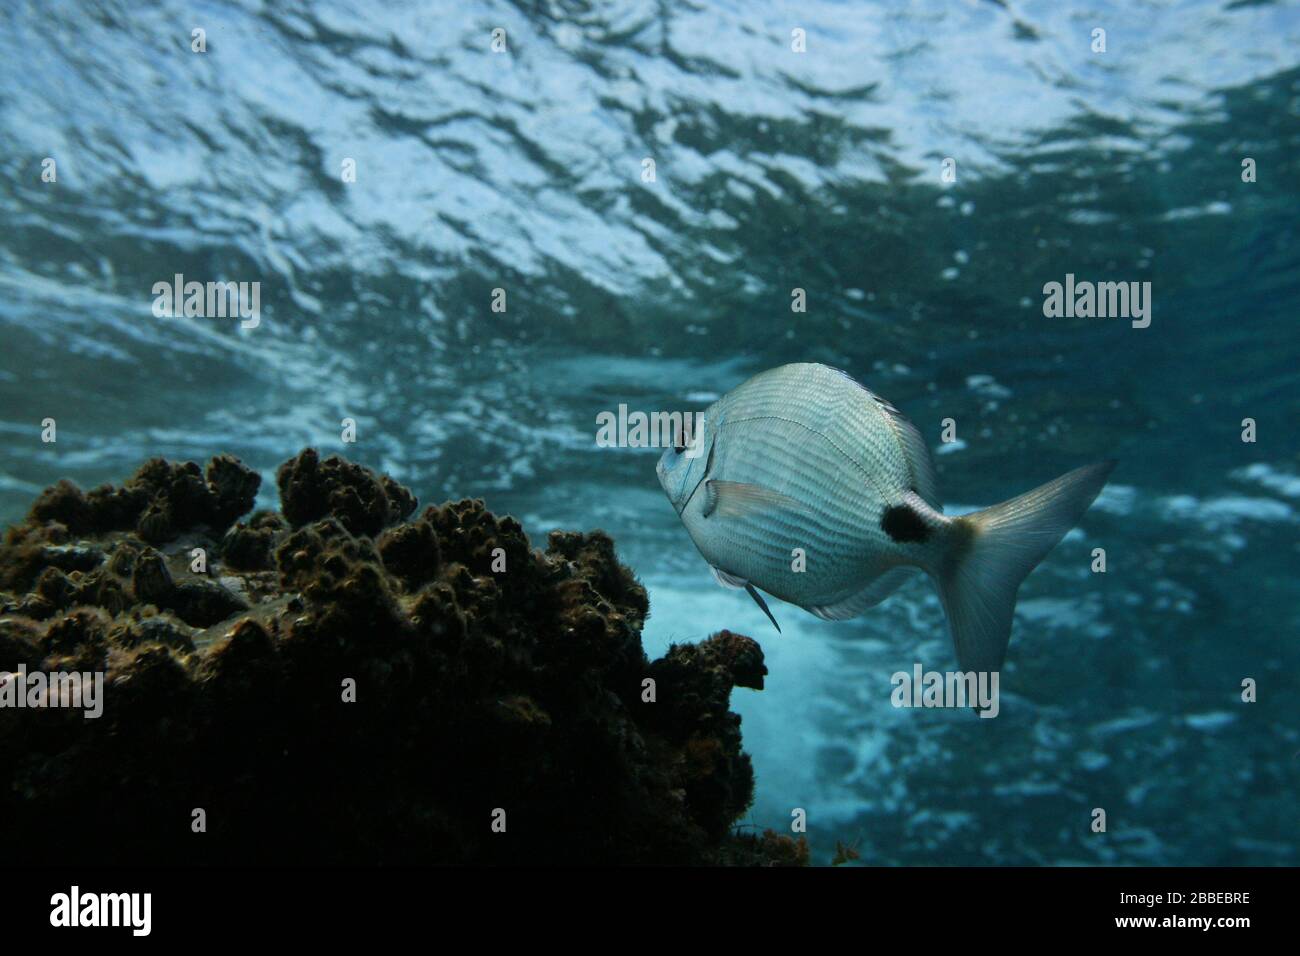 Sargo or white seabream fish swimming in the shallow waters of Flores' coast. Azores, Portugal. Stock Photo